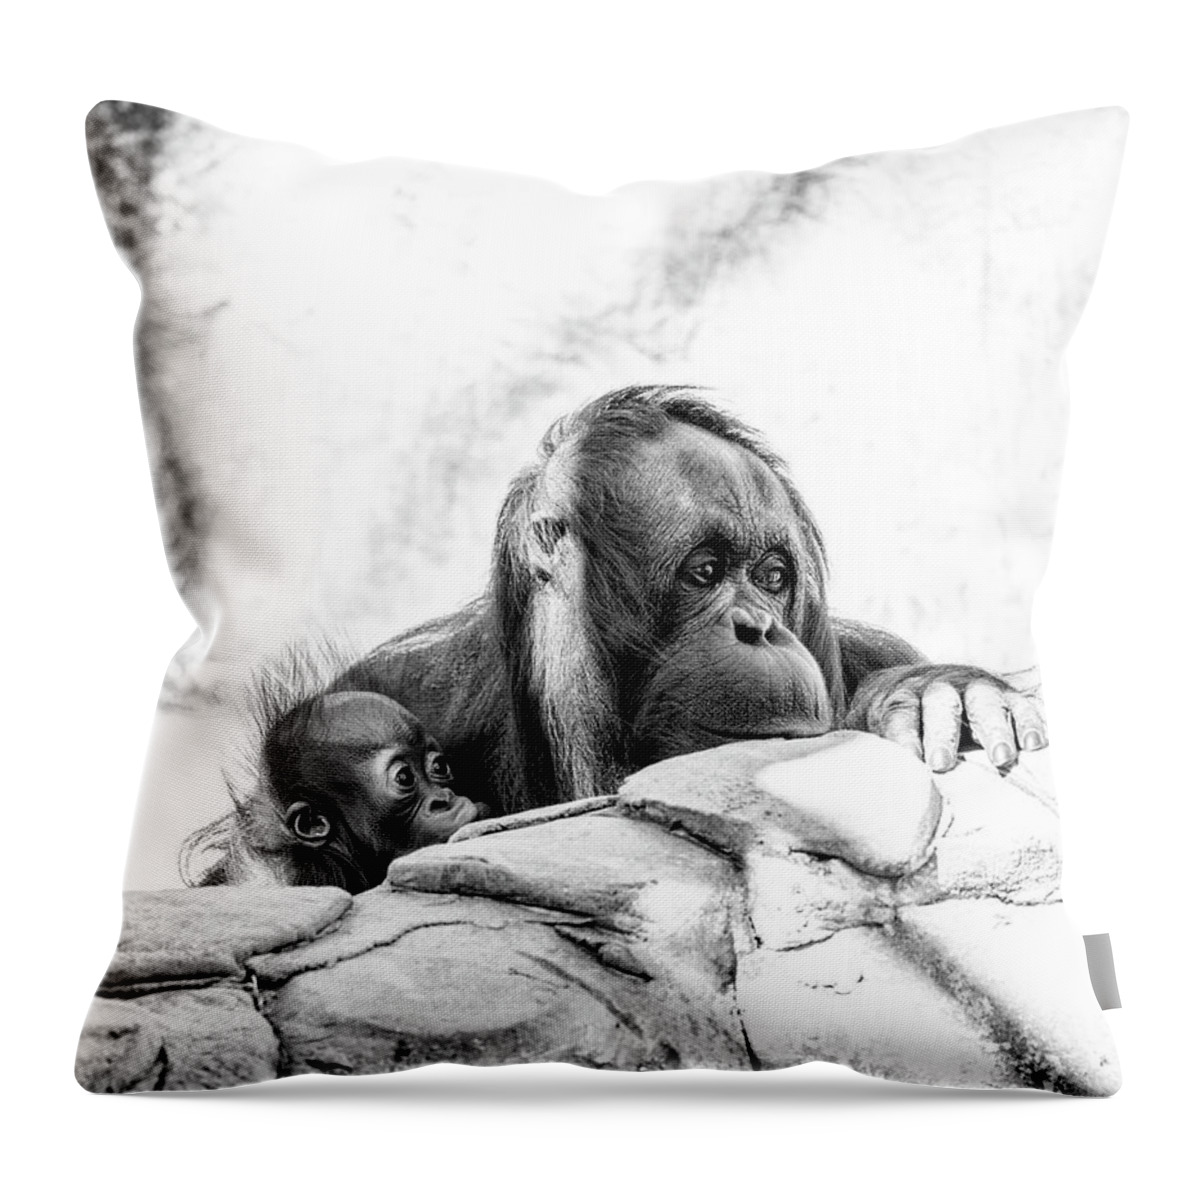 Crystal Yingling Throw Pillow featuring the photograph Hiding by Ghostwinds Photography